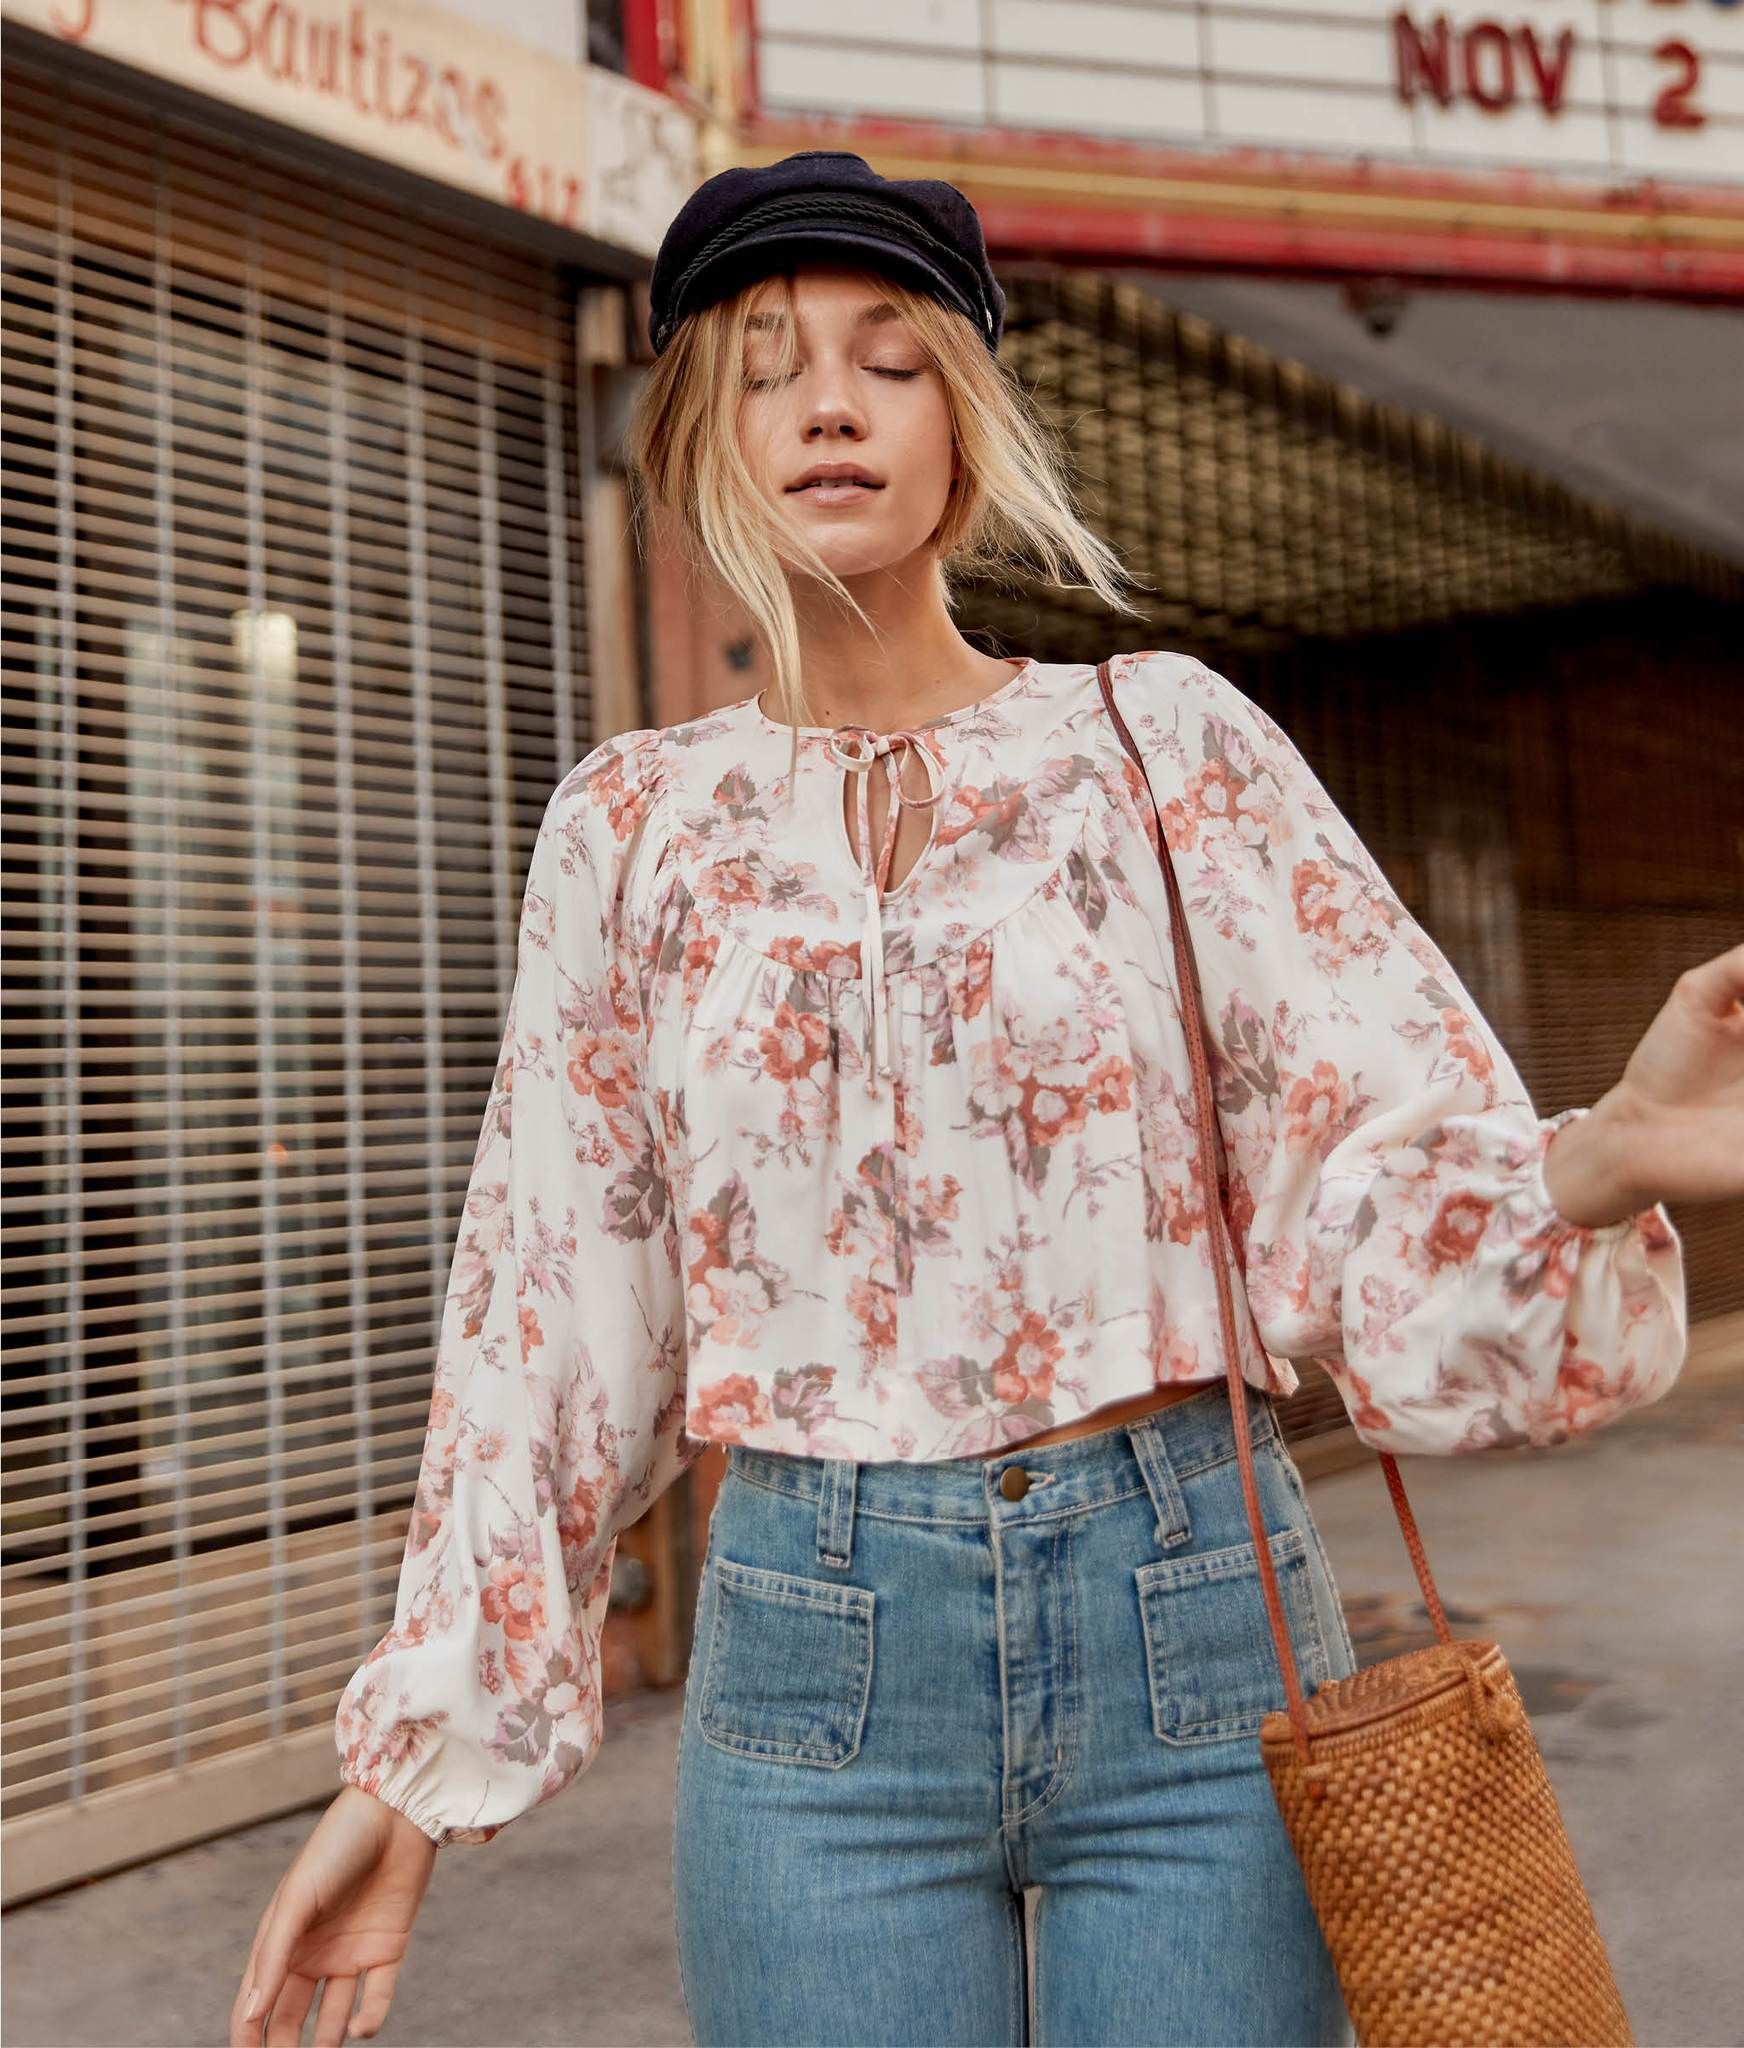 Floral Delight: Stay in Bloom with Floral Tops